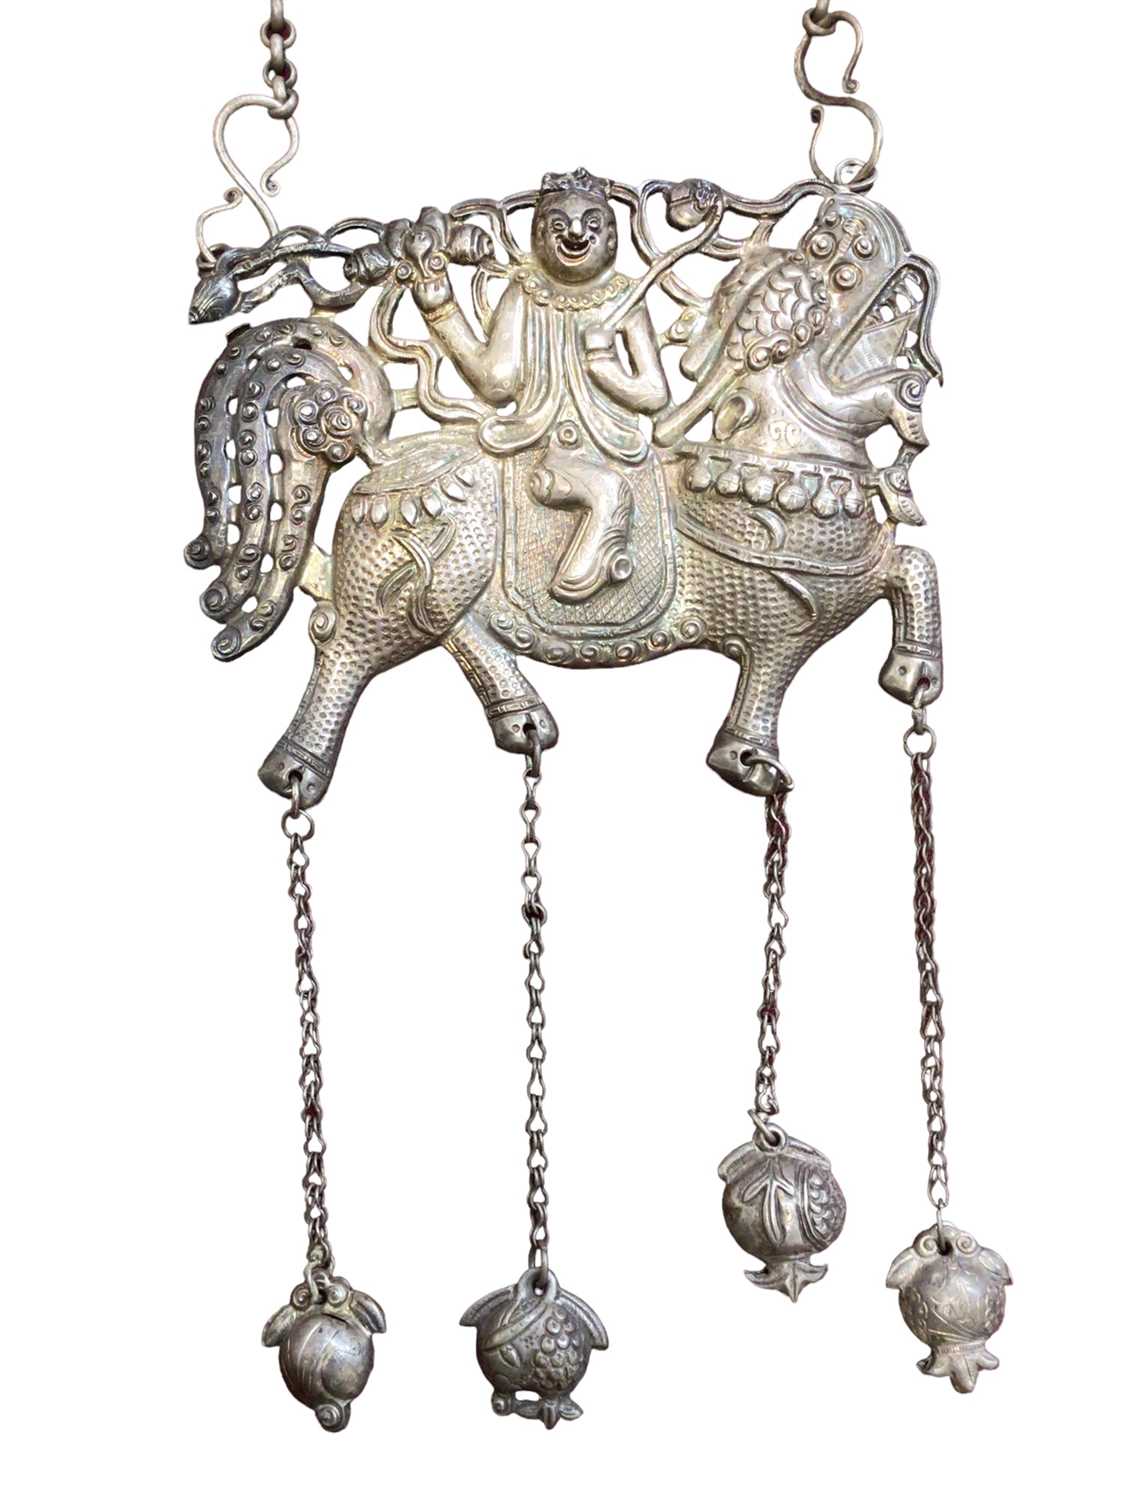 Lot 4 - Old Chinese white metal necklace with a pierced and embossed plaque depicting a figure on a dragon/horse, with bells suspended on chains from the hooves. Plaque measures approximately 13cm x 11cm